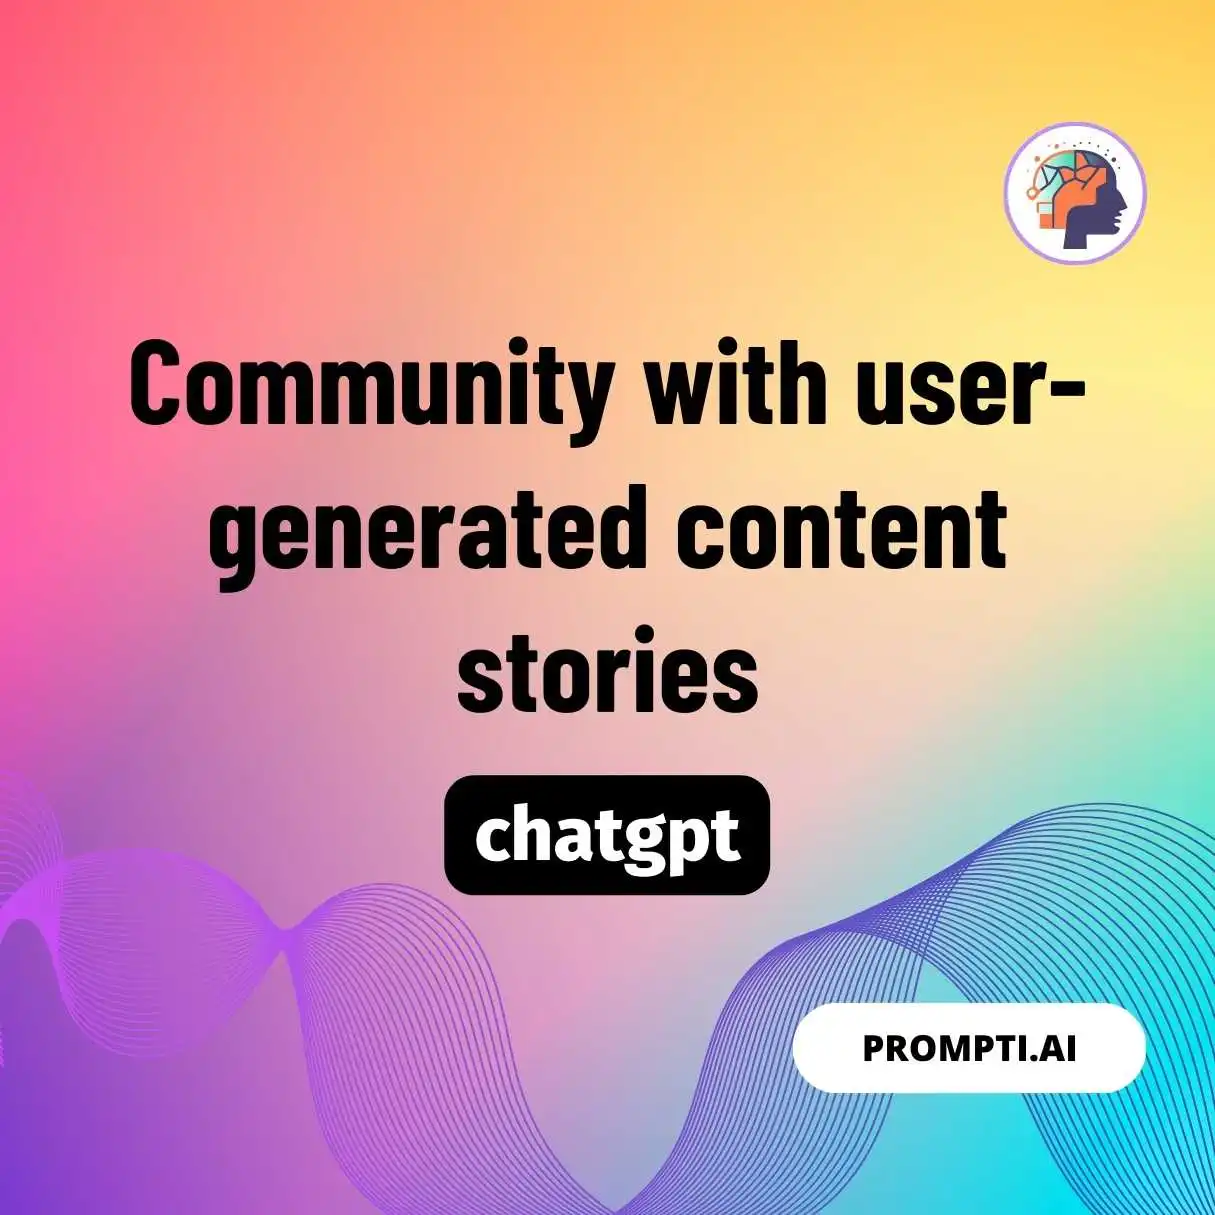 Community with user-generated content stories